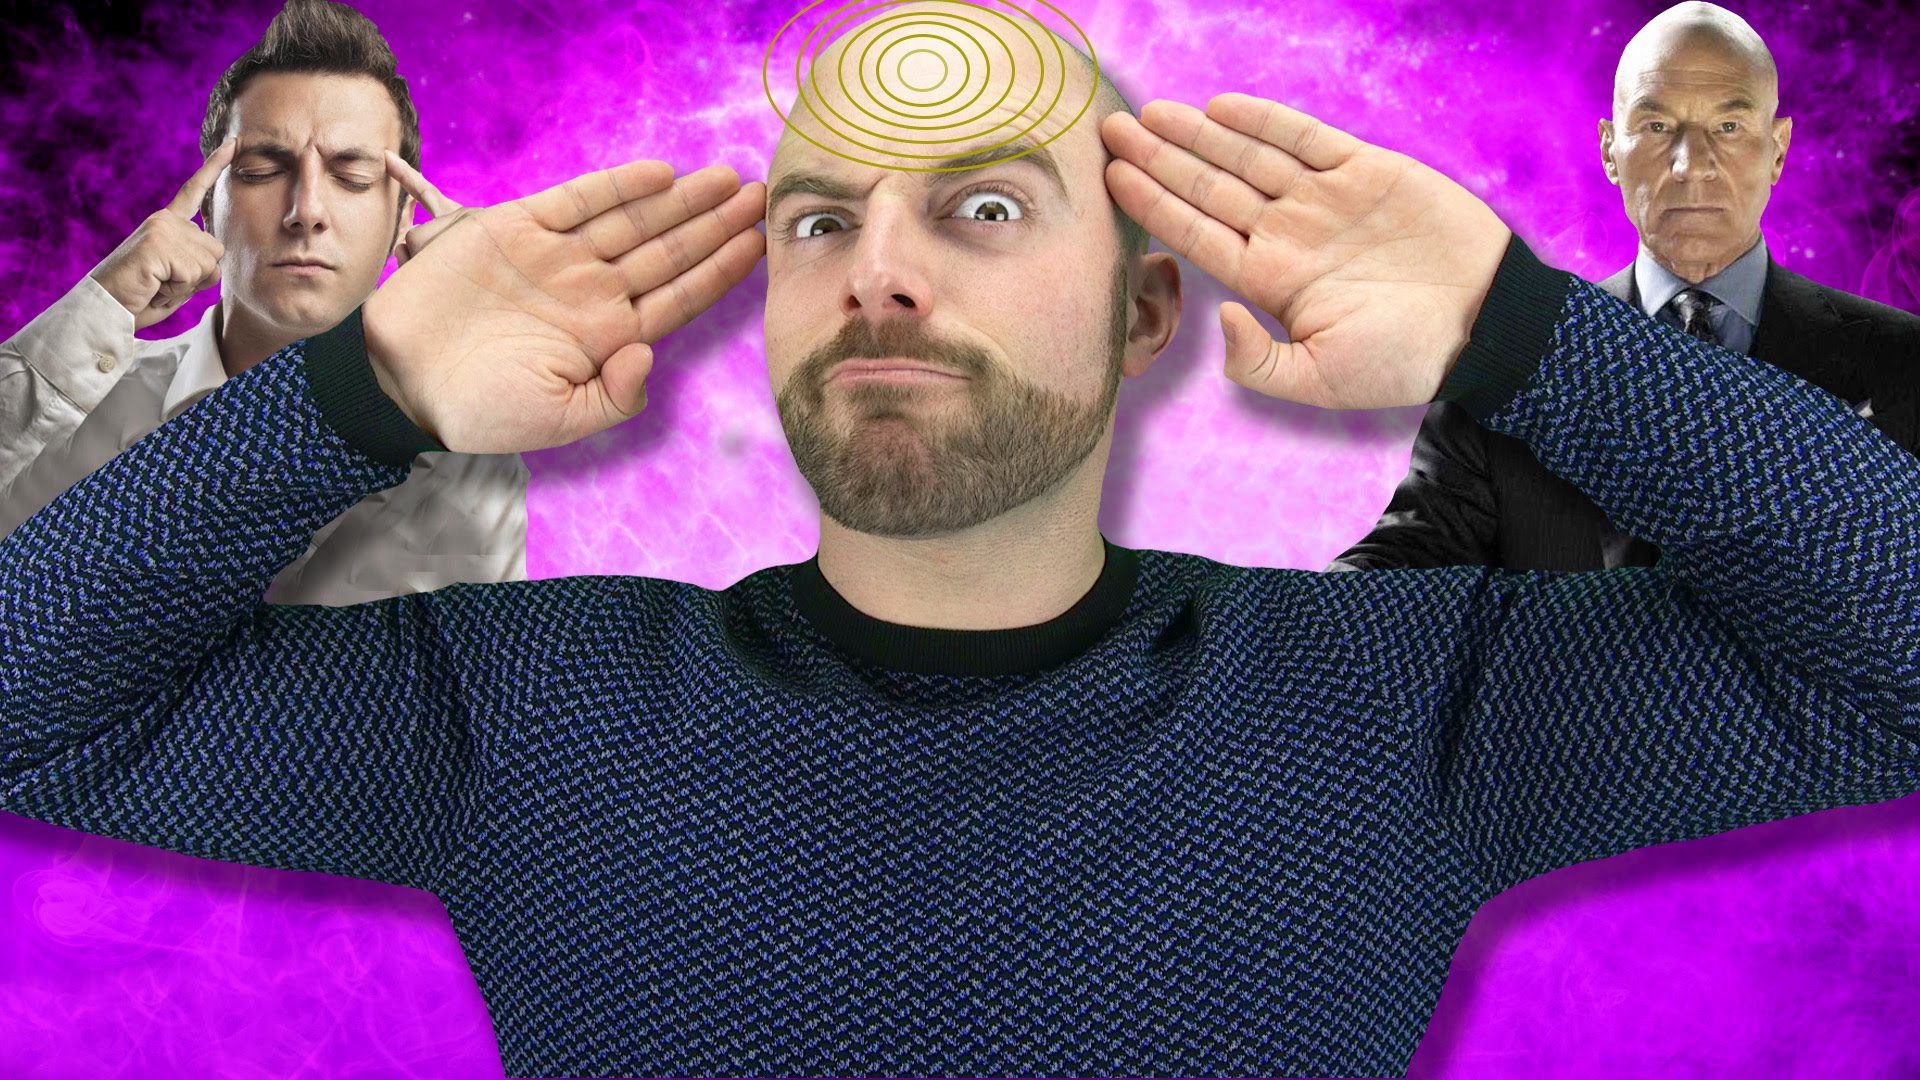 10 Psychic Abilities People May Actually Have